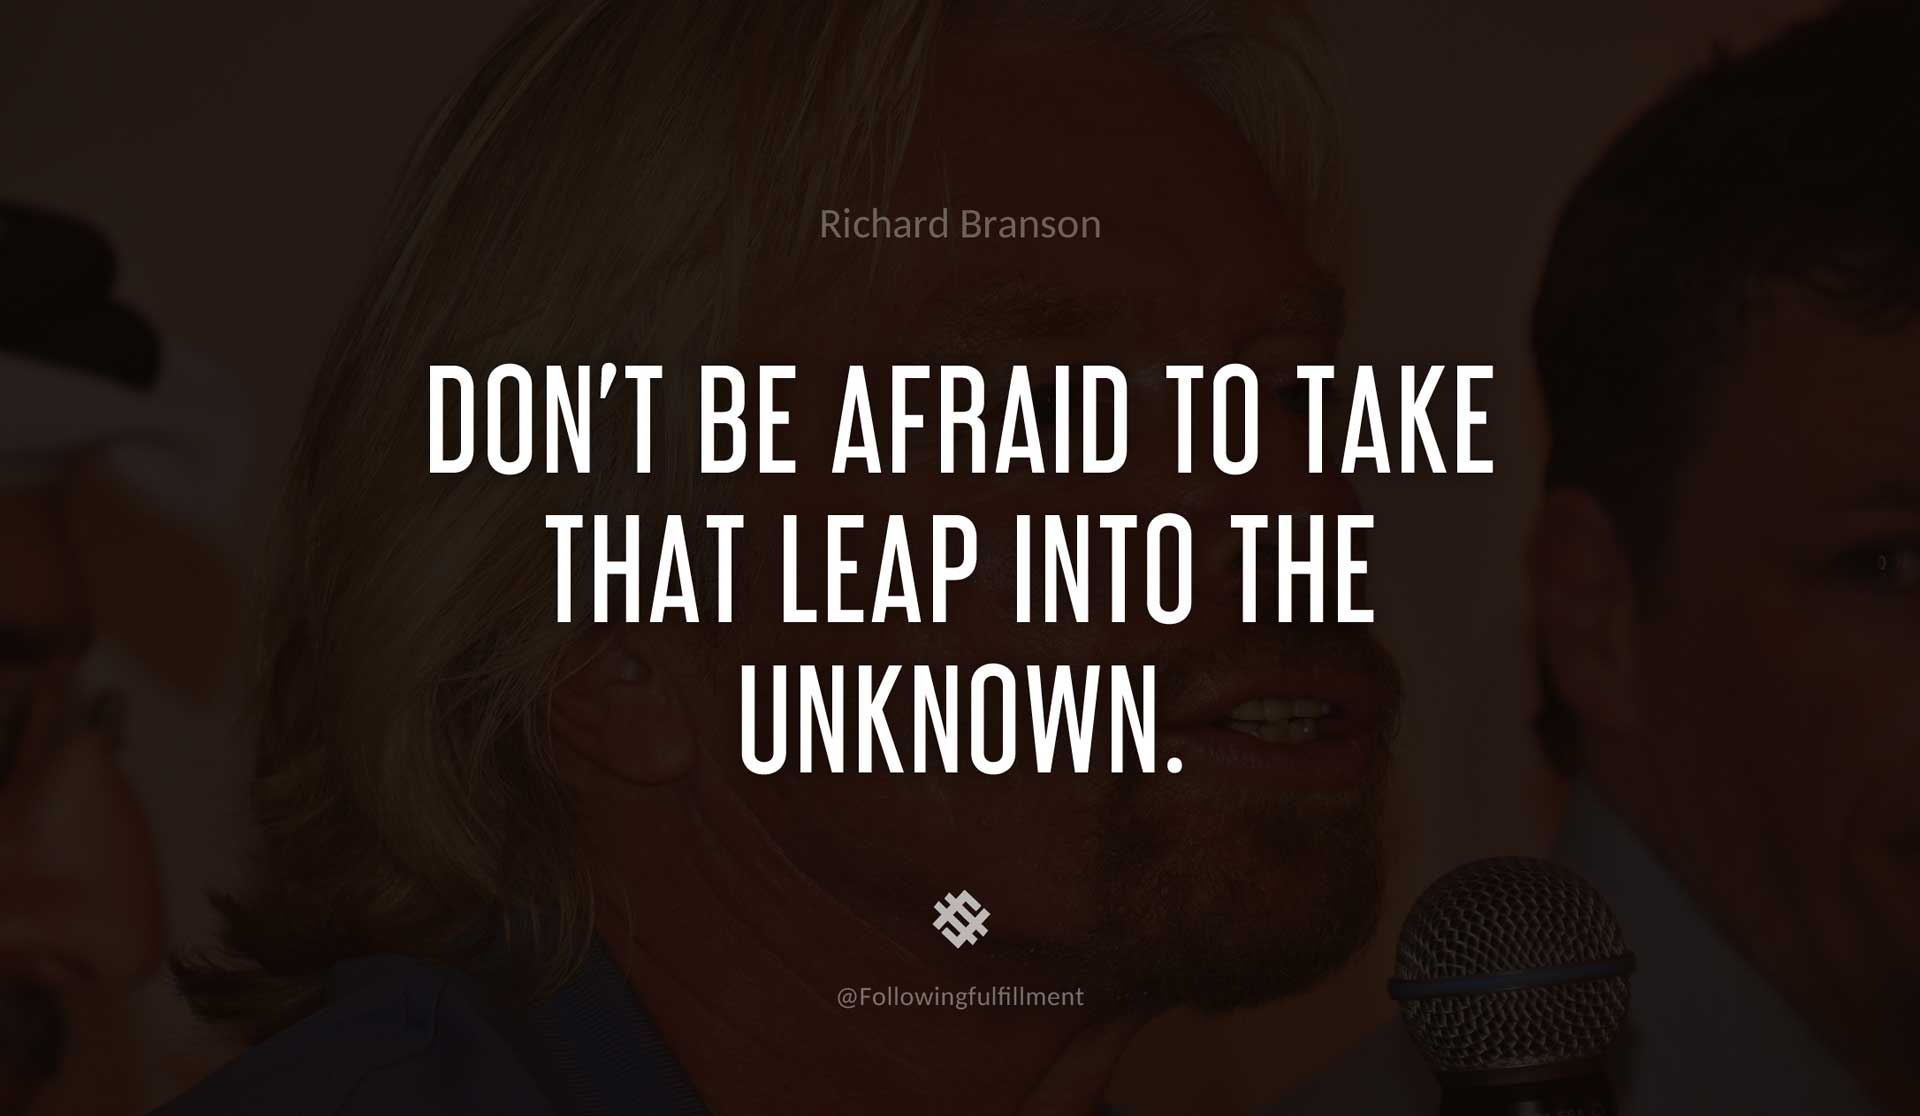 Don't-be-afraid-to-take-that-leap-into-the-unknown.-RICHARD-BRANSON-Quote.jpg